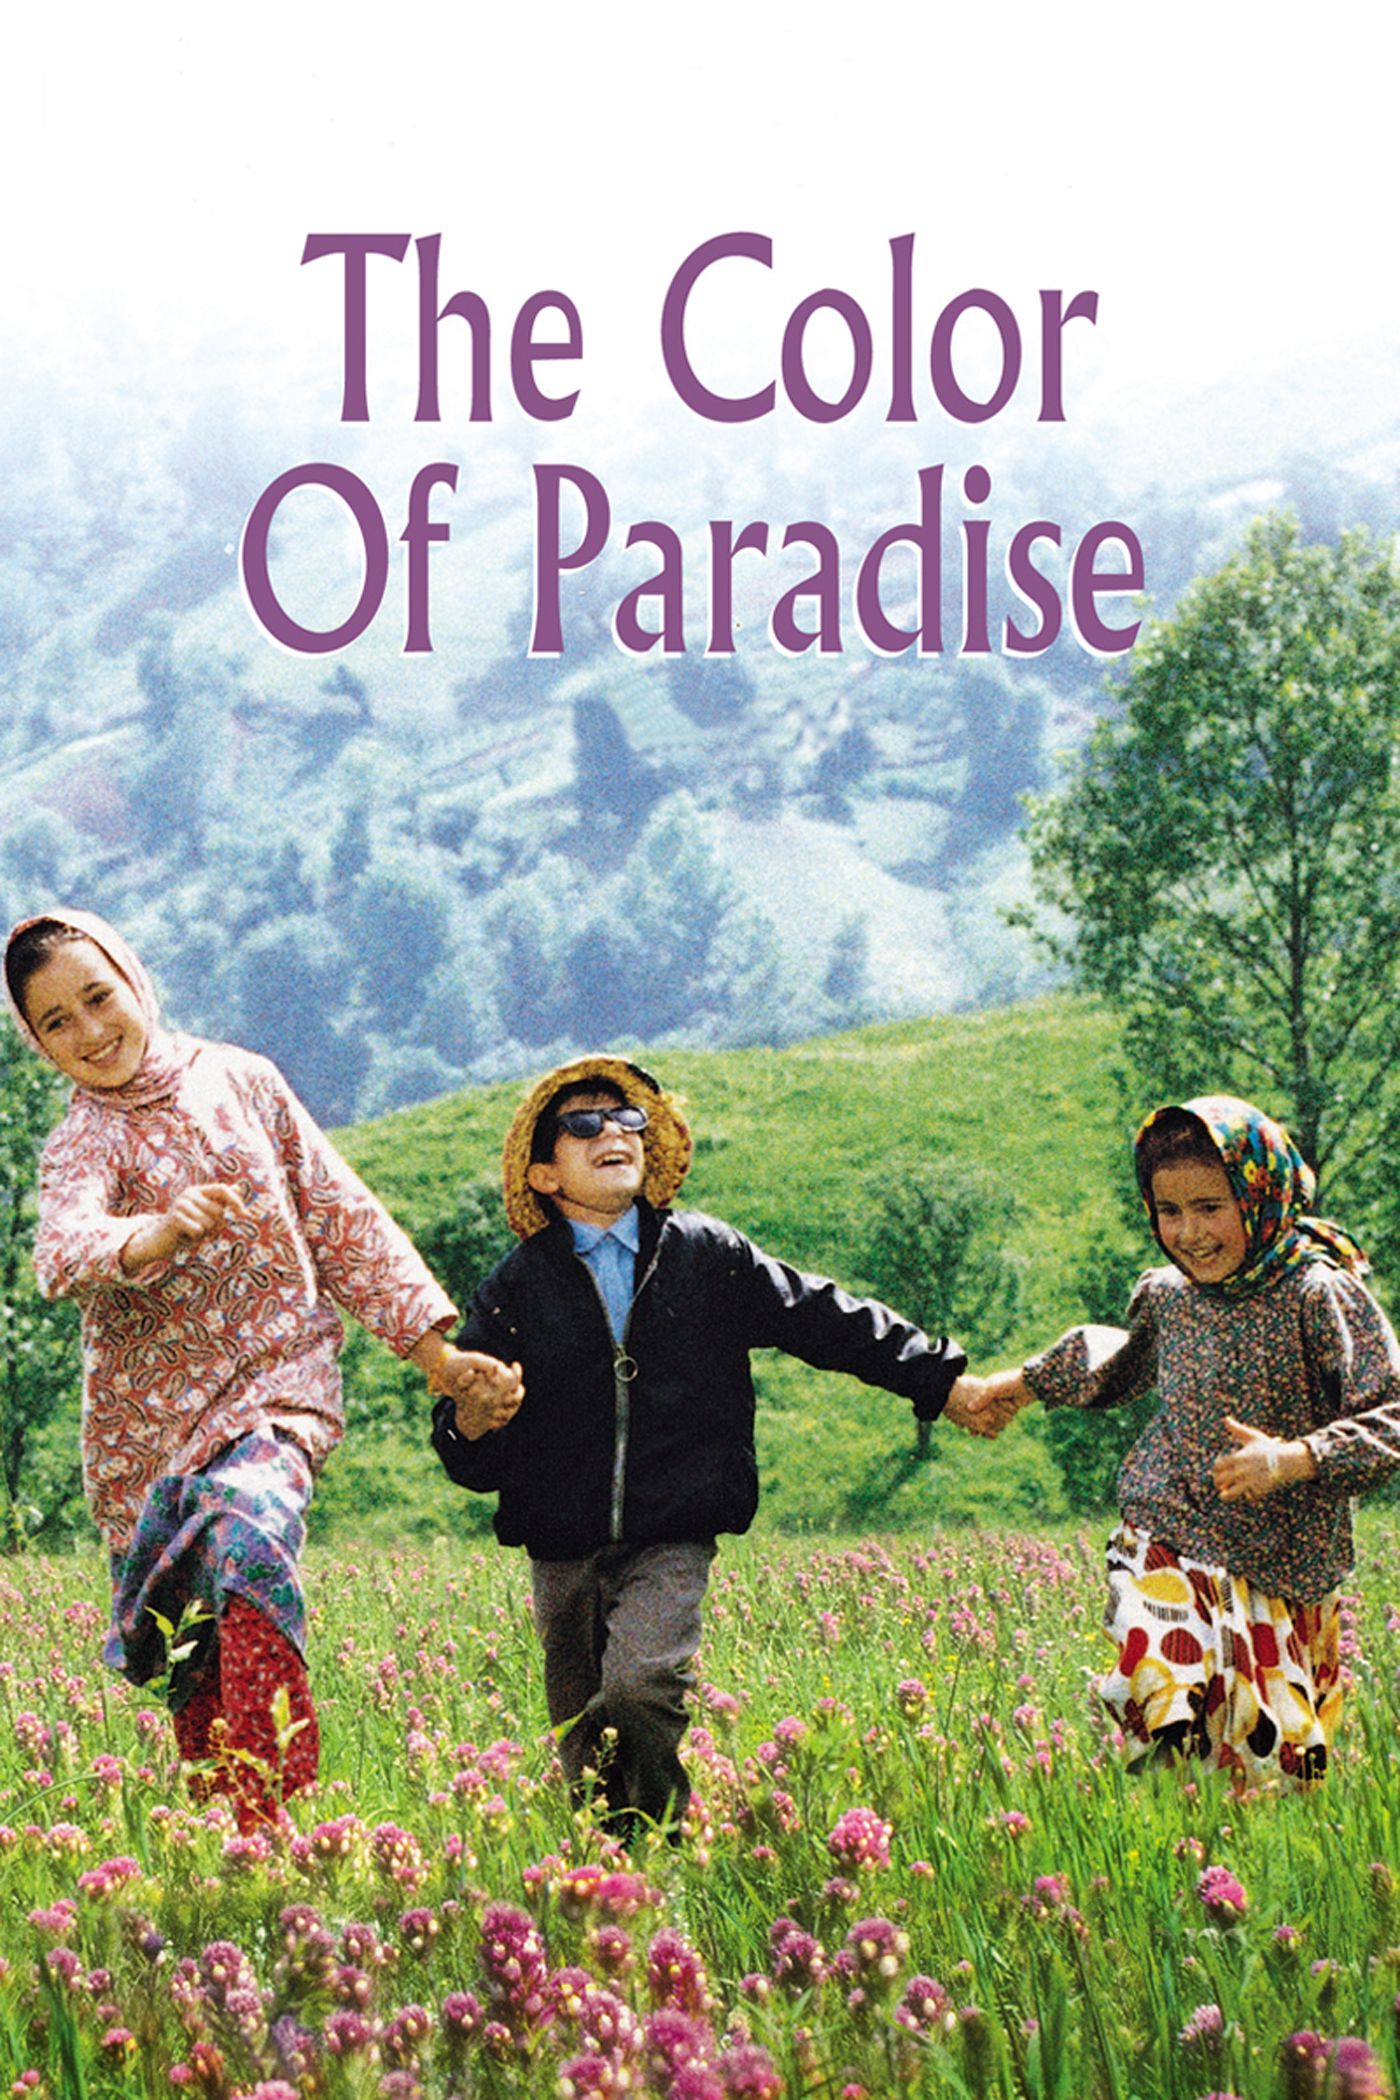 The Color of Paradise | Full Movie | Movies Anywhere